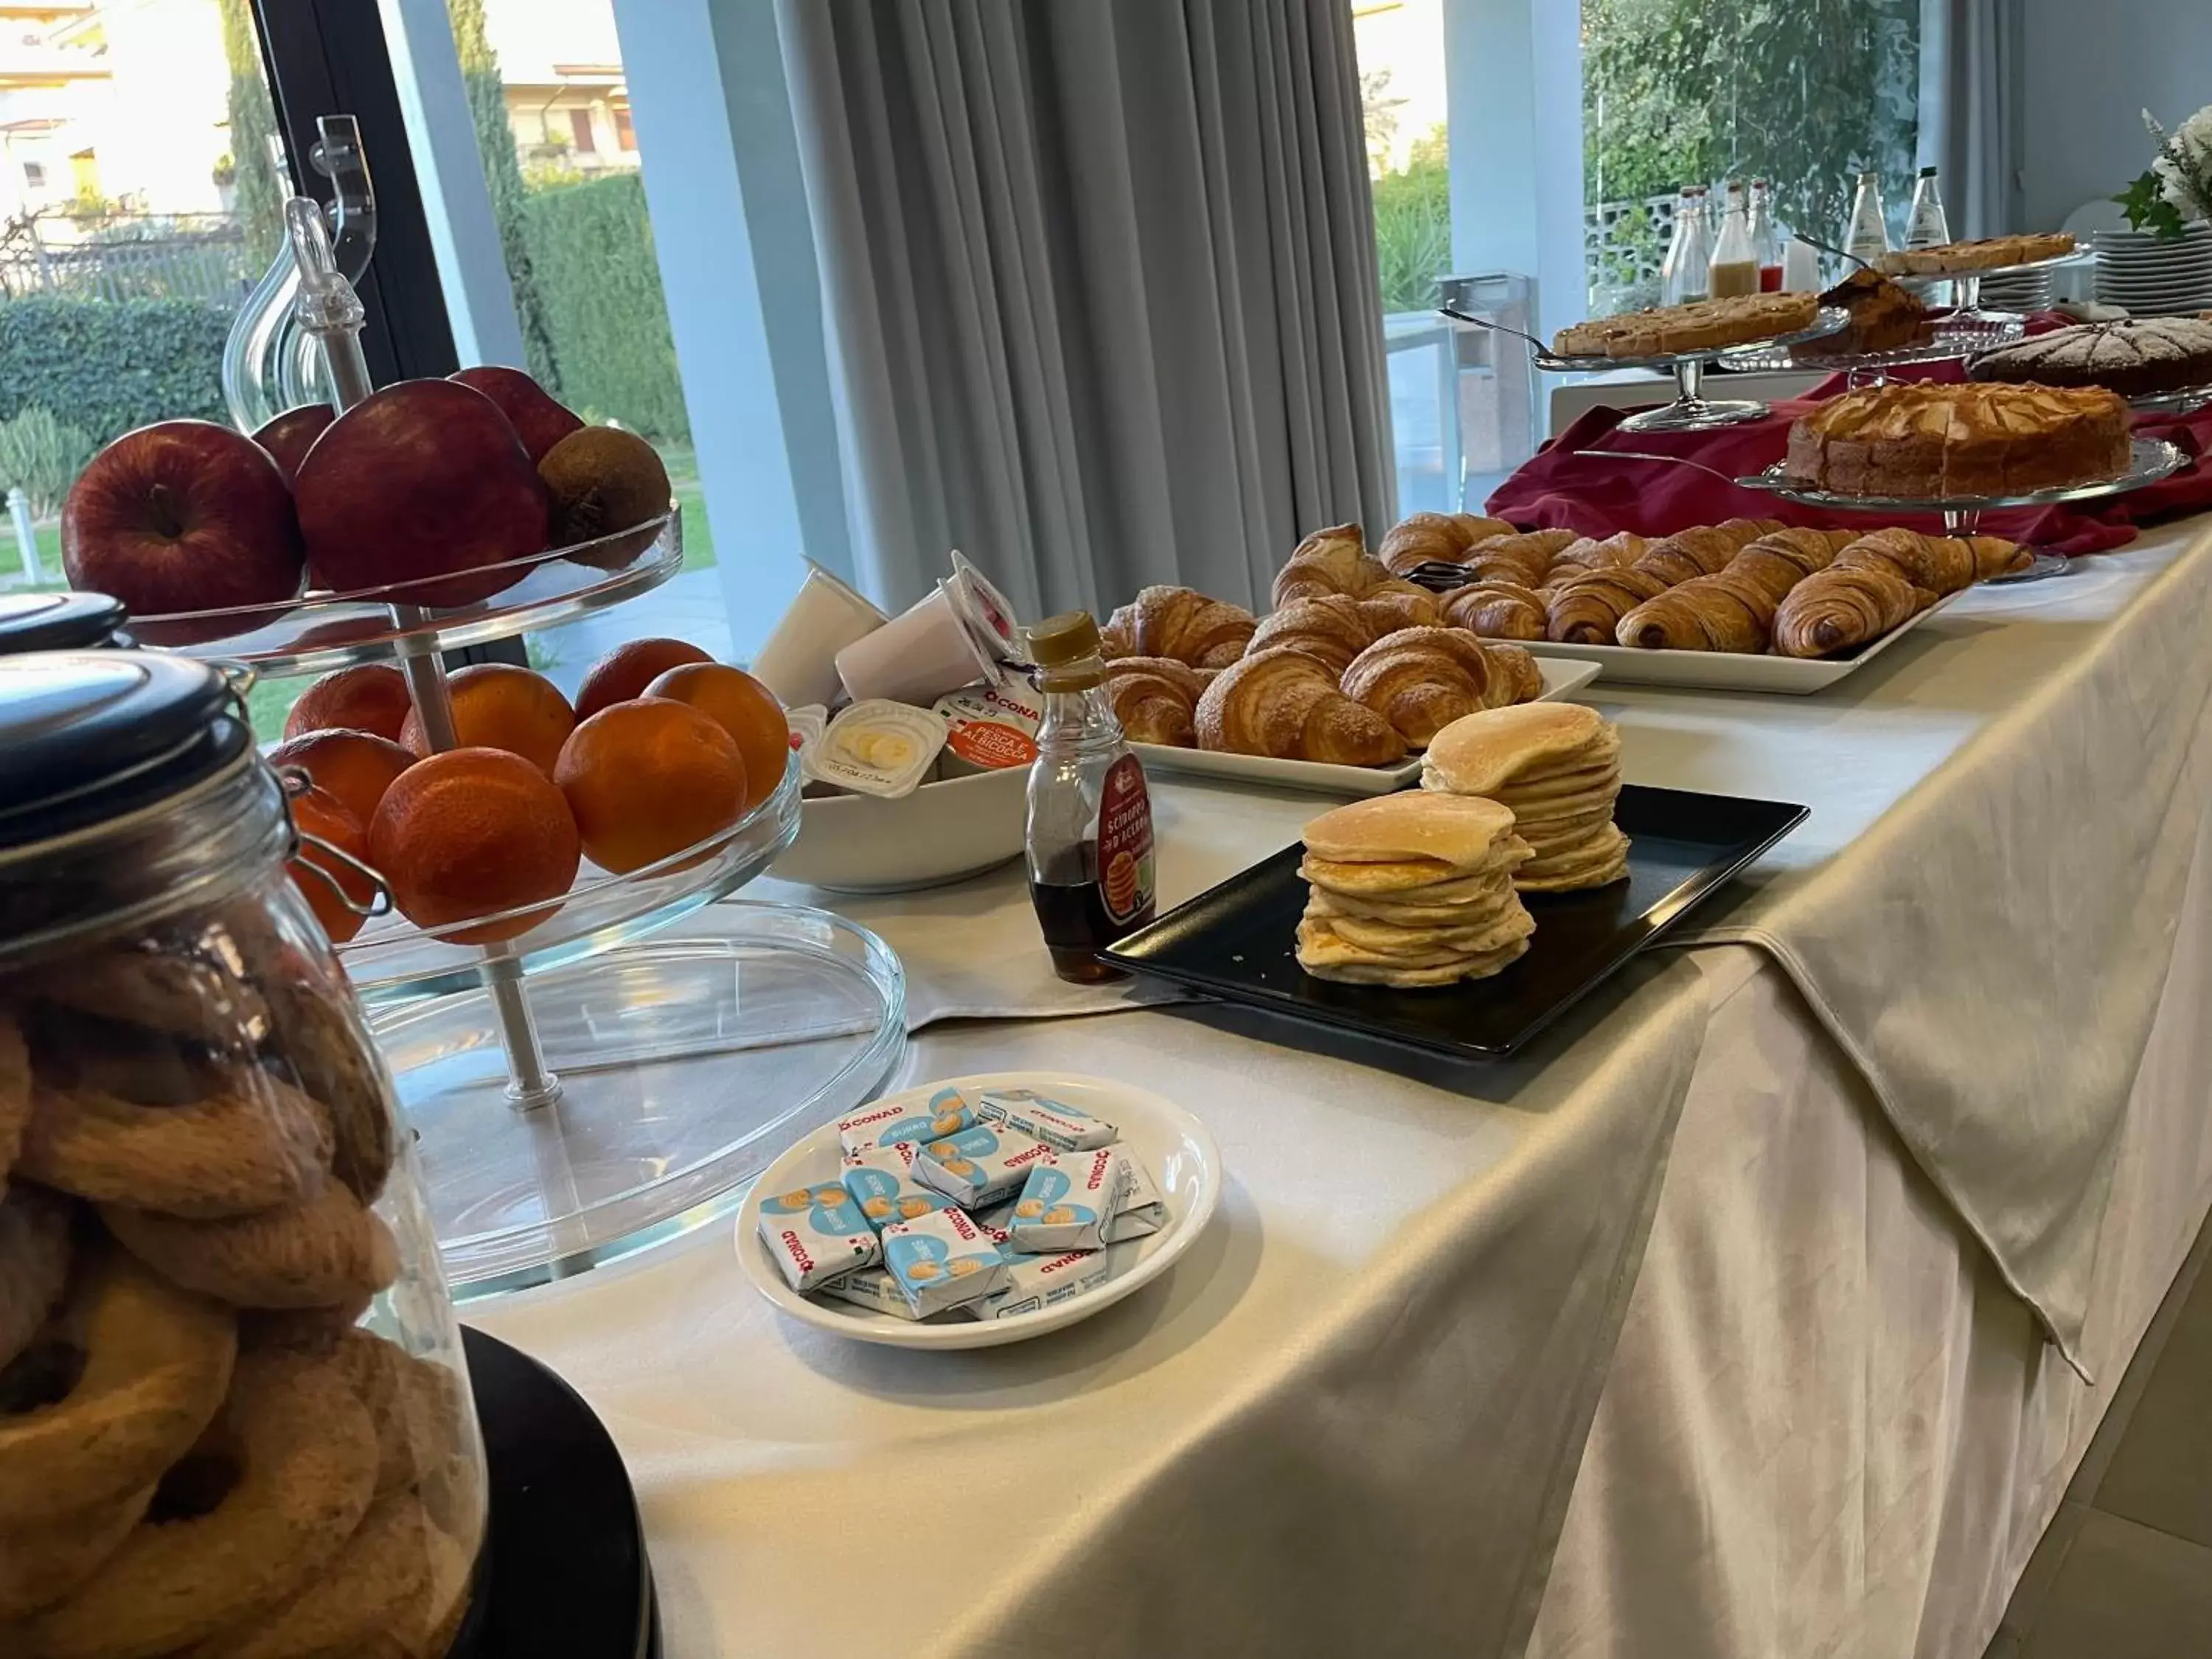 Food and drinks, Breakfast in Le Ceramiche - Hotel Residence ed Eventi